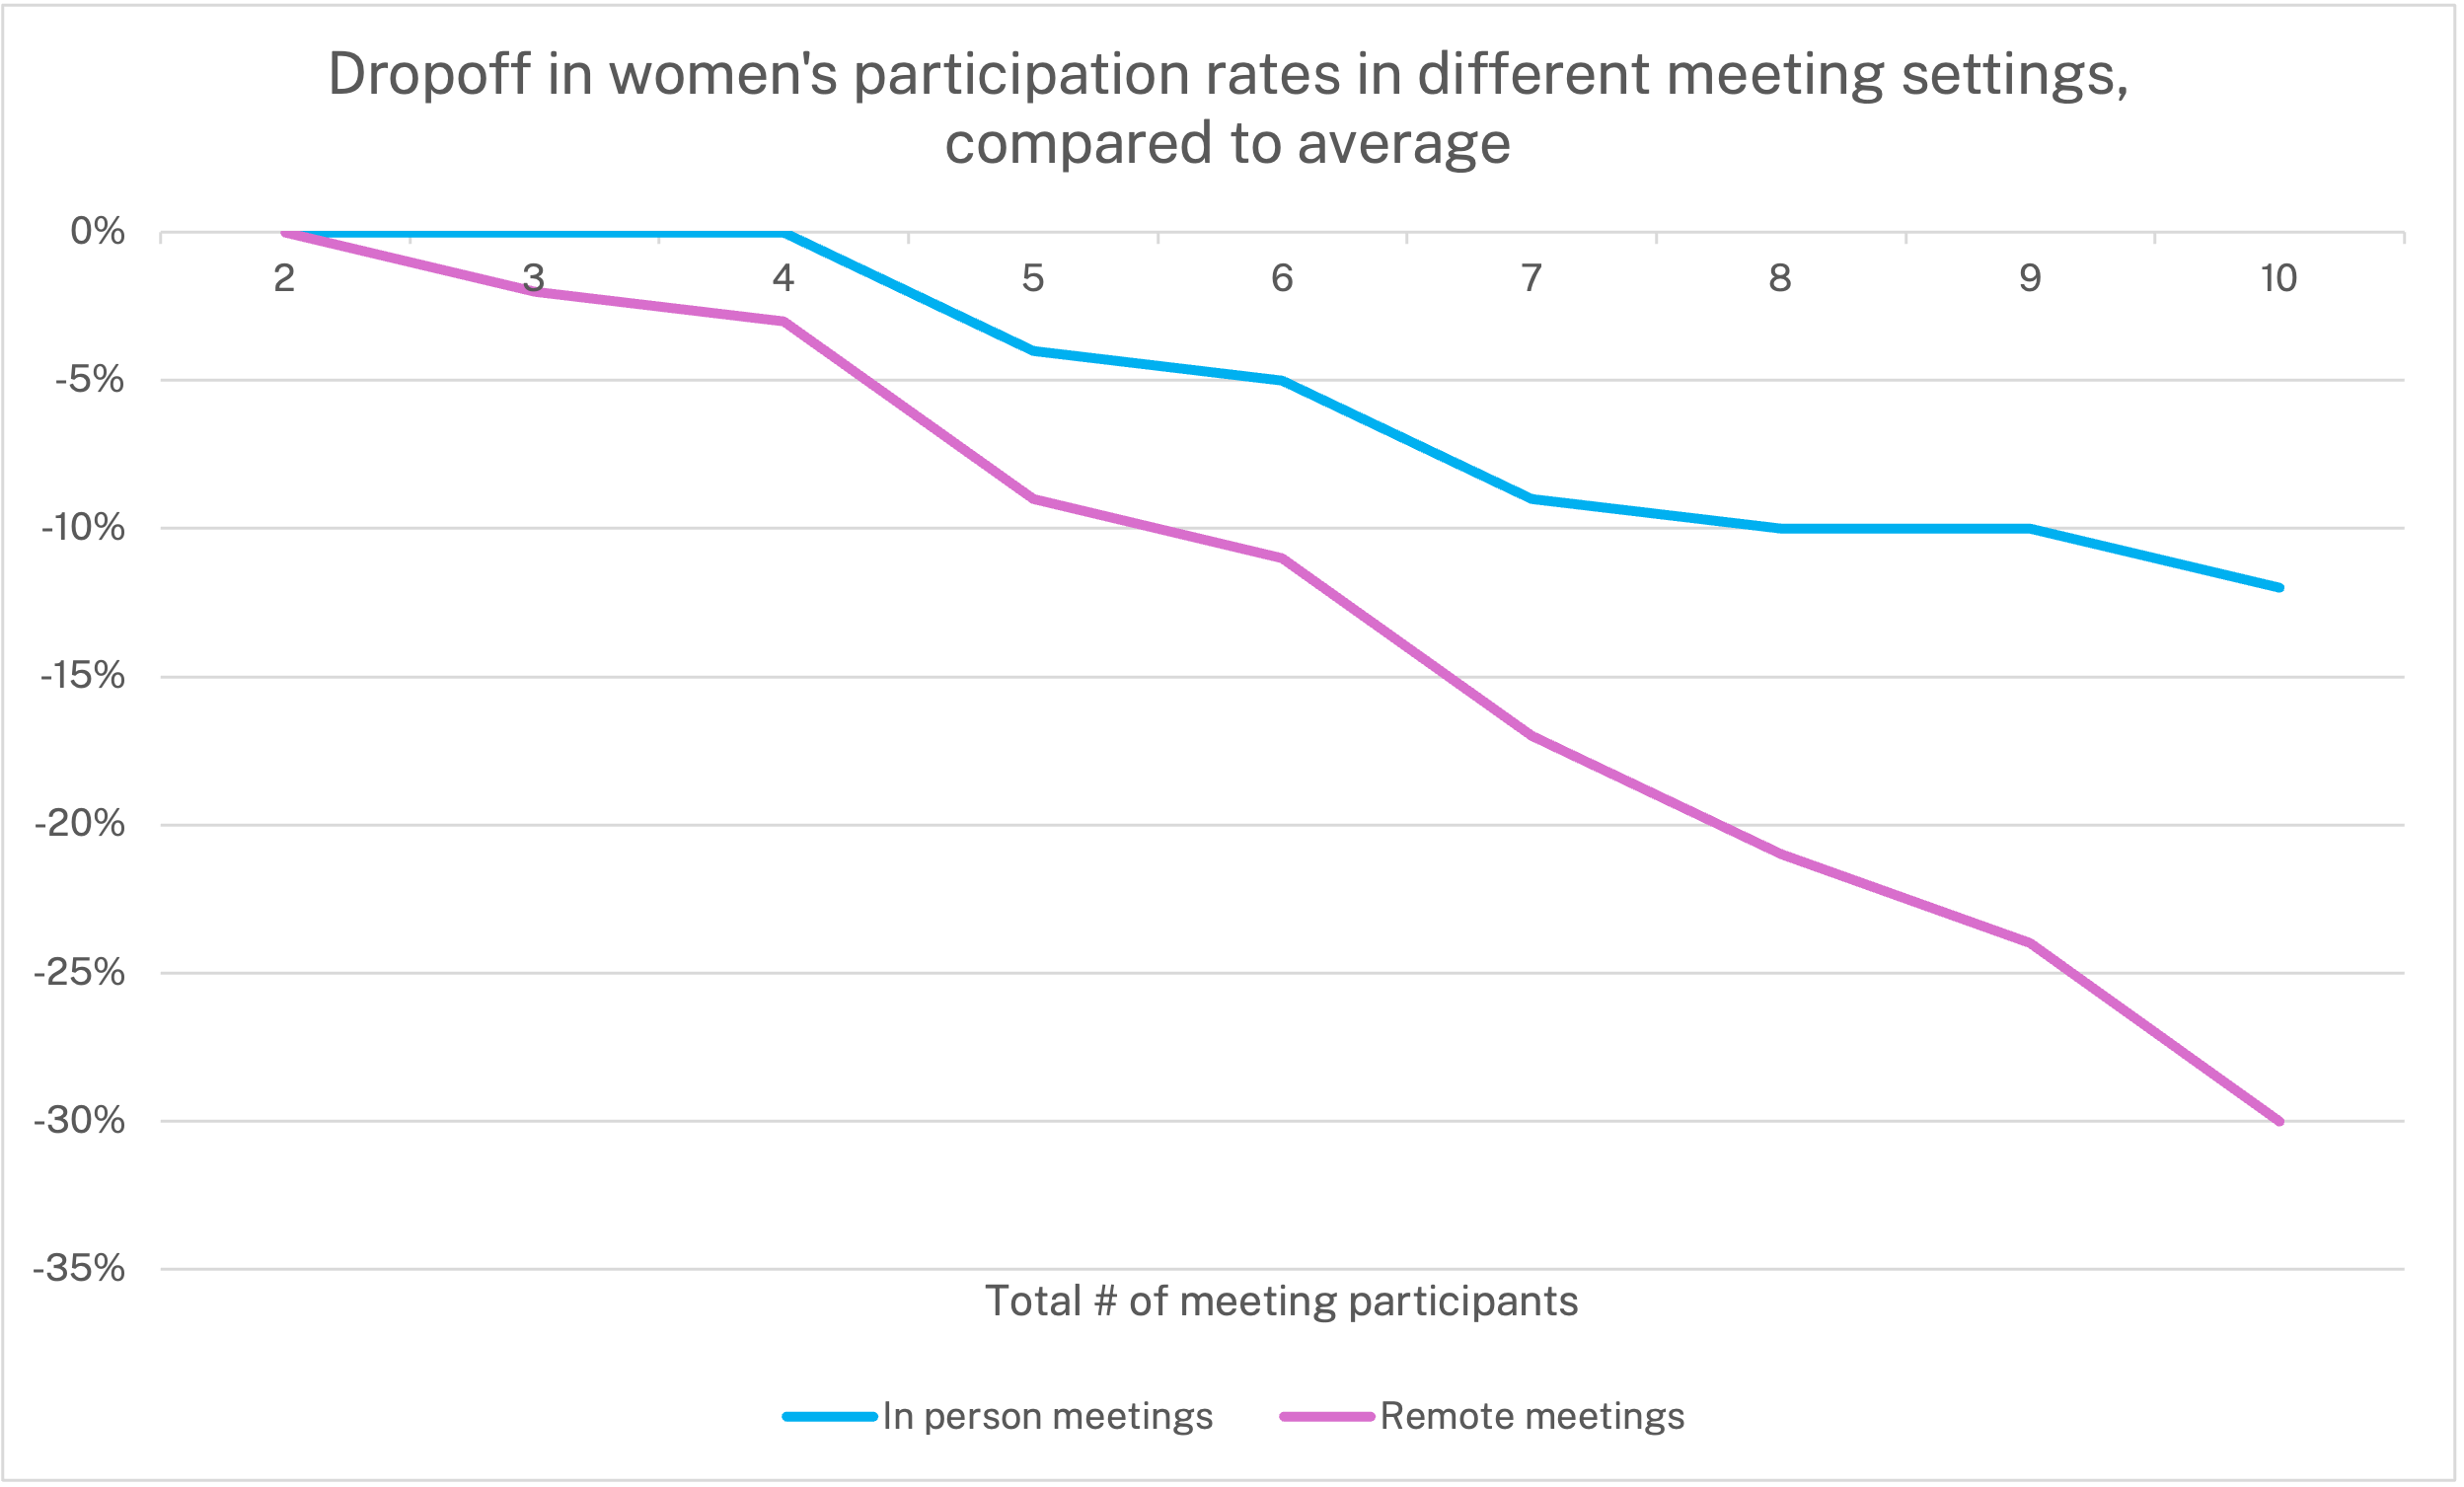 Chart showing the dropoff in women's participation rates compared to average, in different meeting settings # of participants	In person meetings	Remote meetings 2	0%	0% 3	0%	-2% 4	0%	-3% 5	-4%	-9% 6	-5%	-11% 7	-9%	-17% 8	-10%	-21% 9	-10%	-24% 10	-12%	-30%